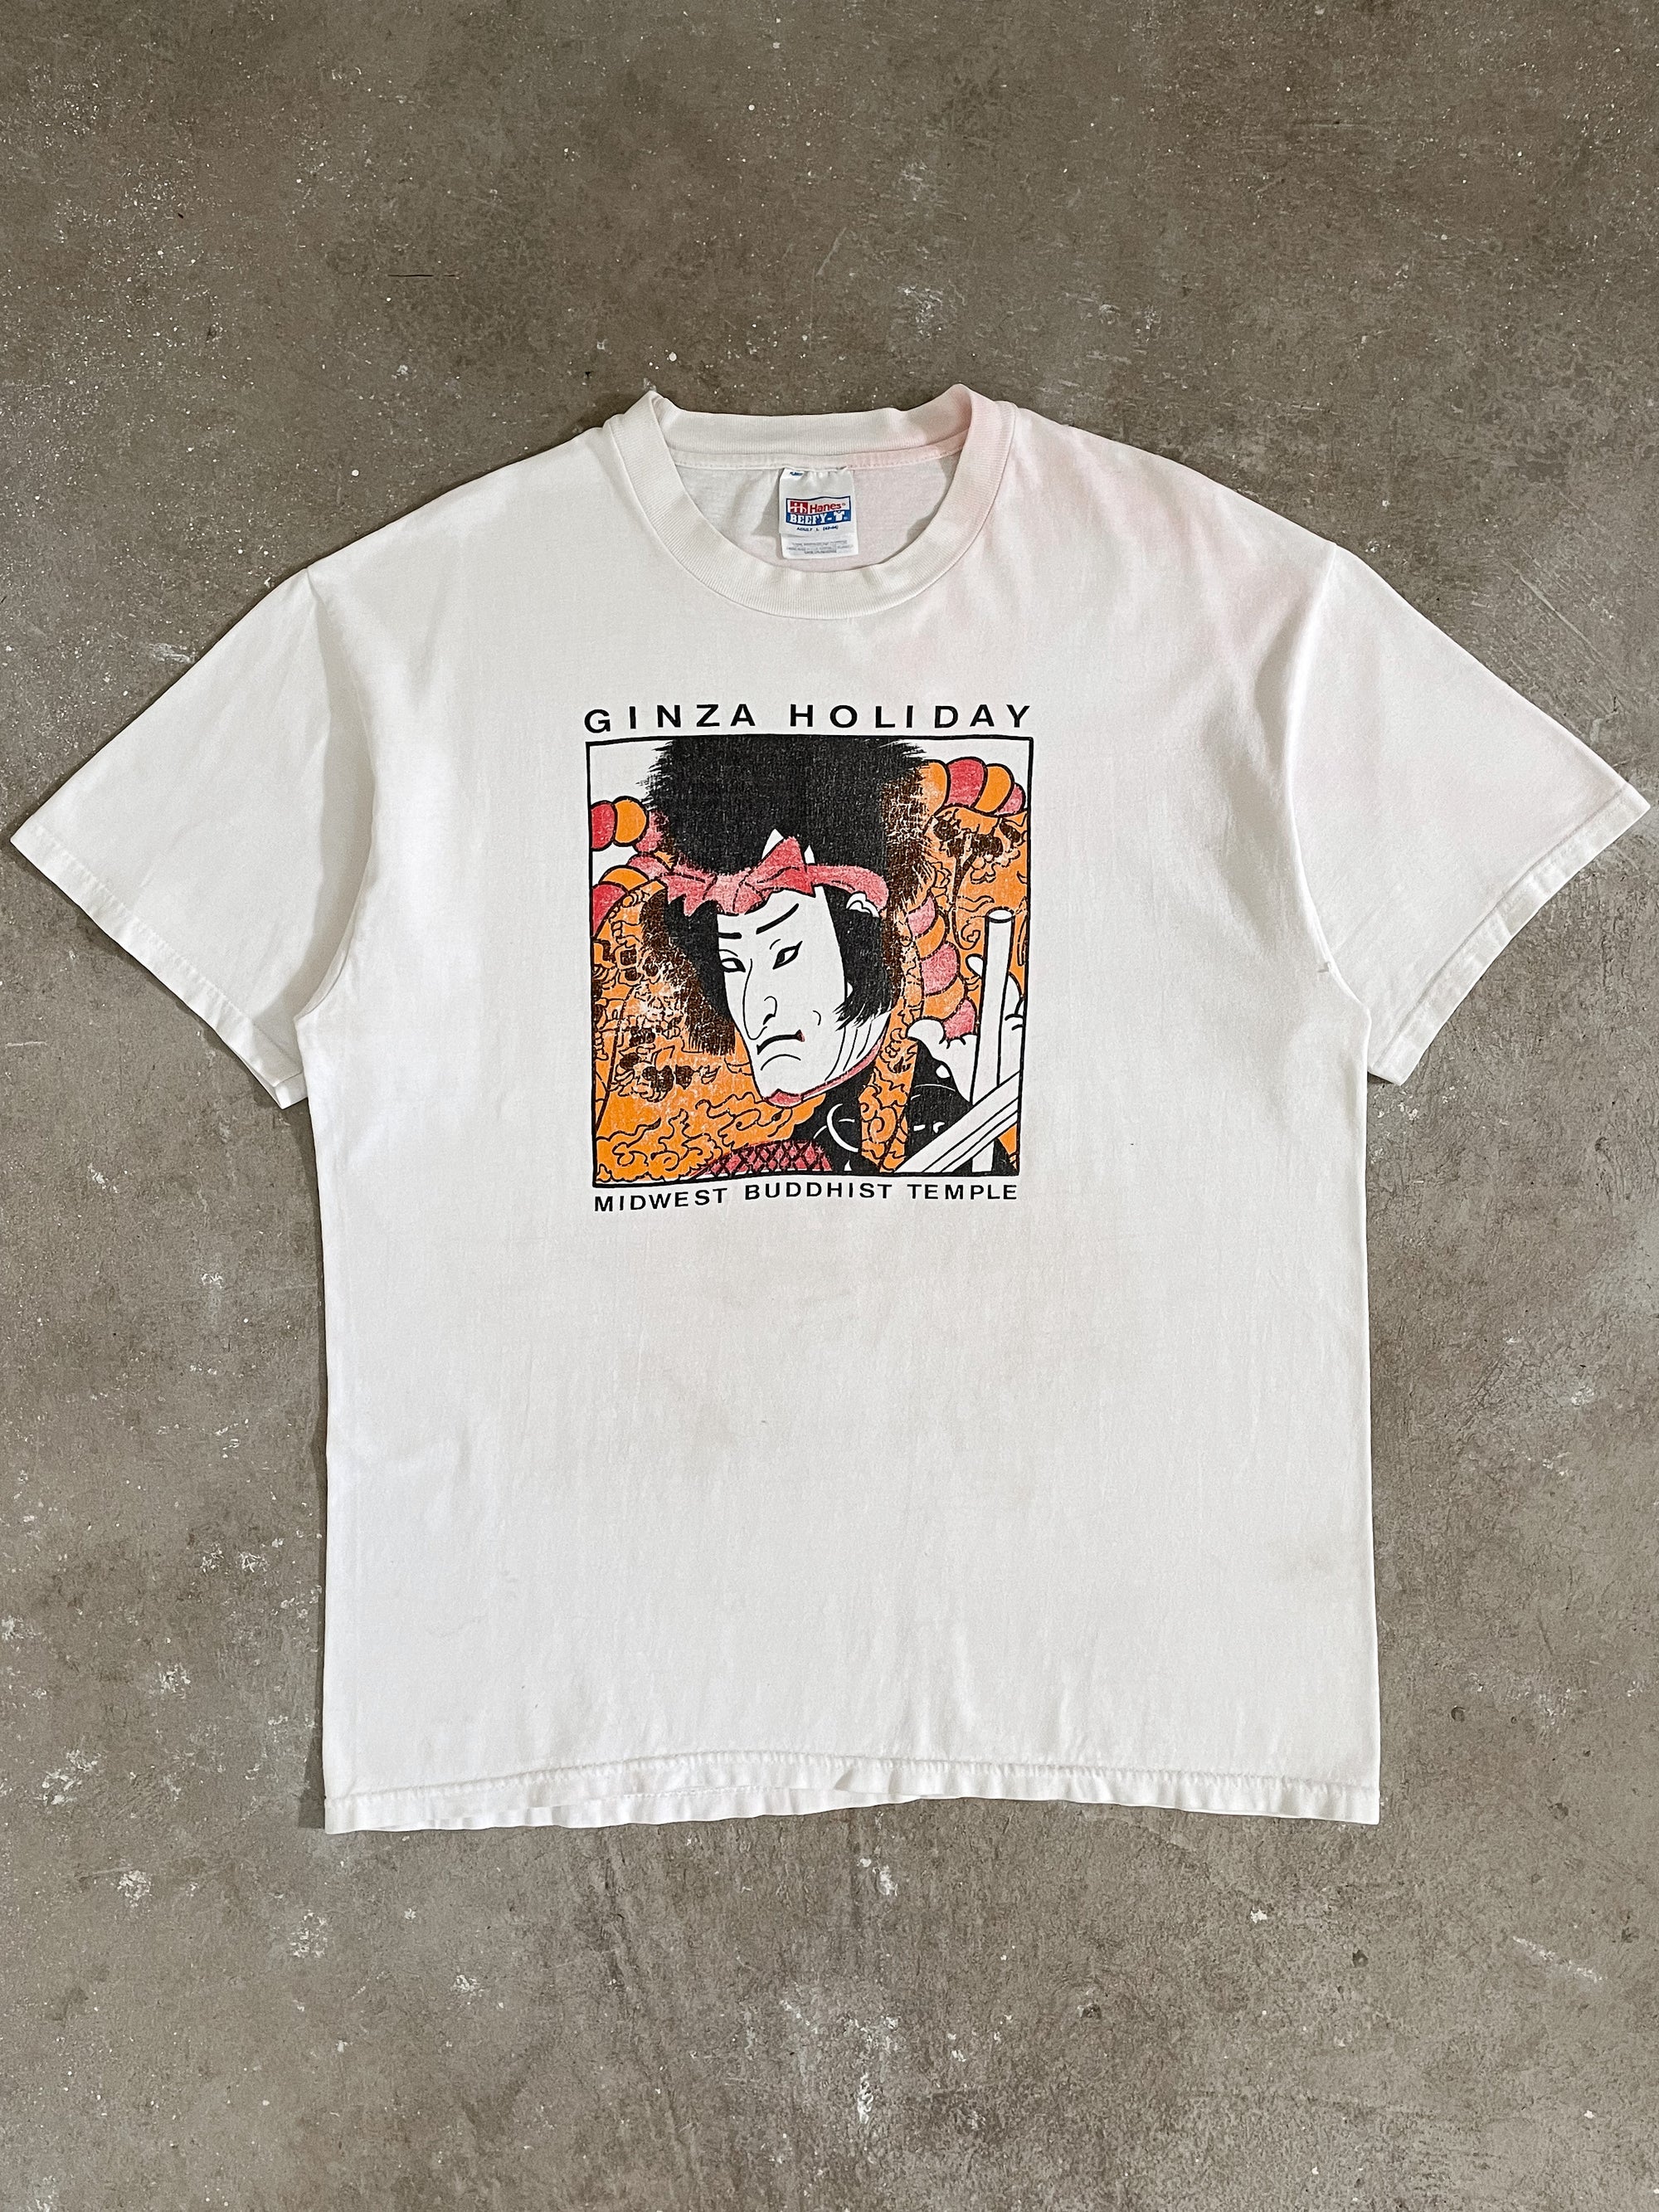 1990s “Ginza Holiday” Tee (L)